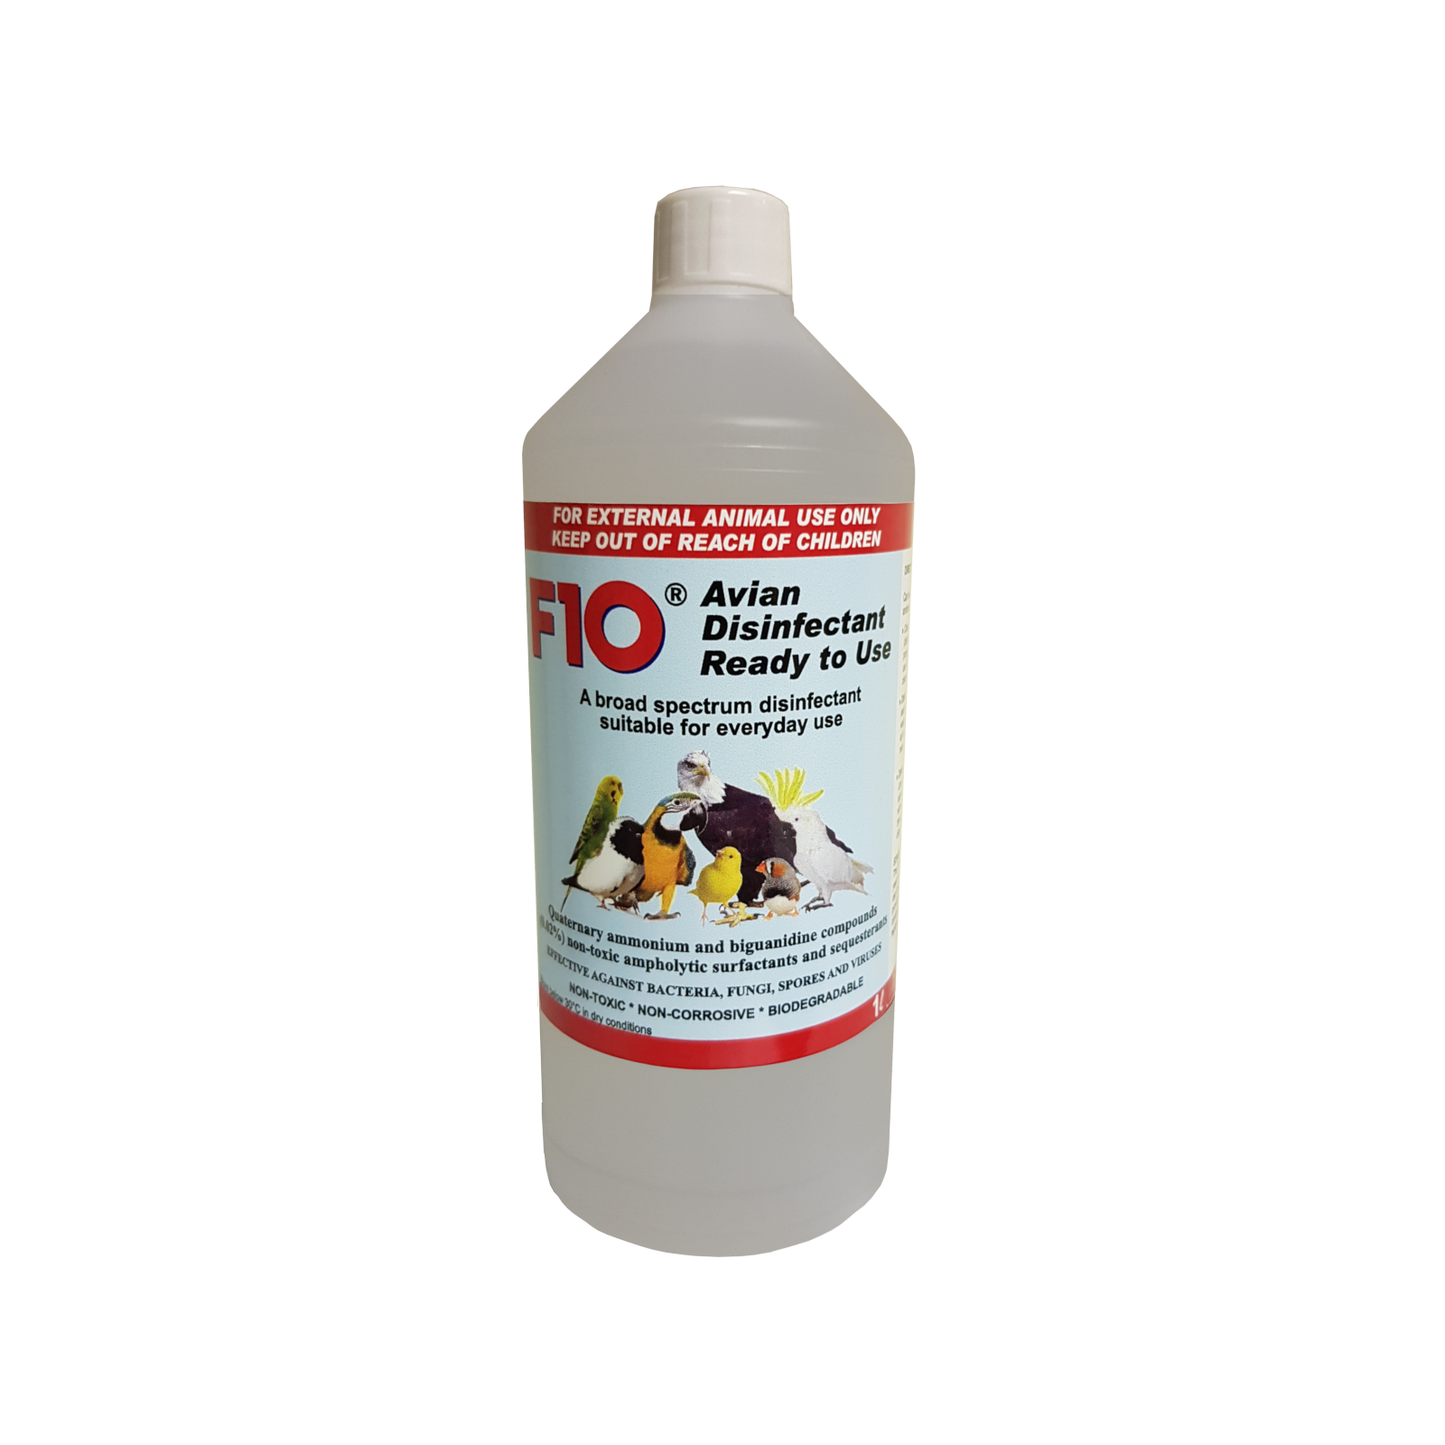 A 1 litre bottle of F10 Avian Disinfectant Ready to Use 